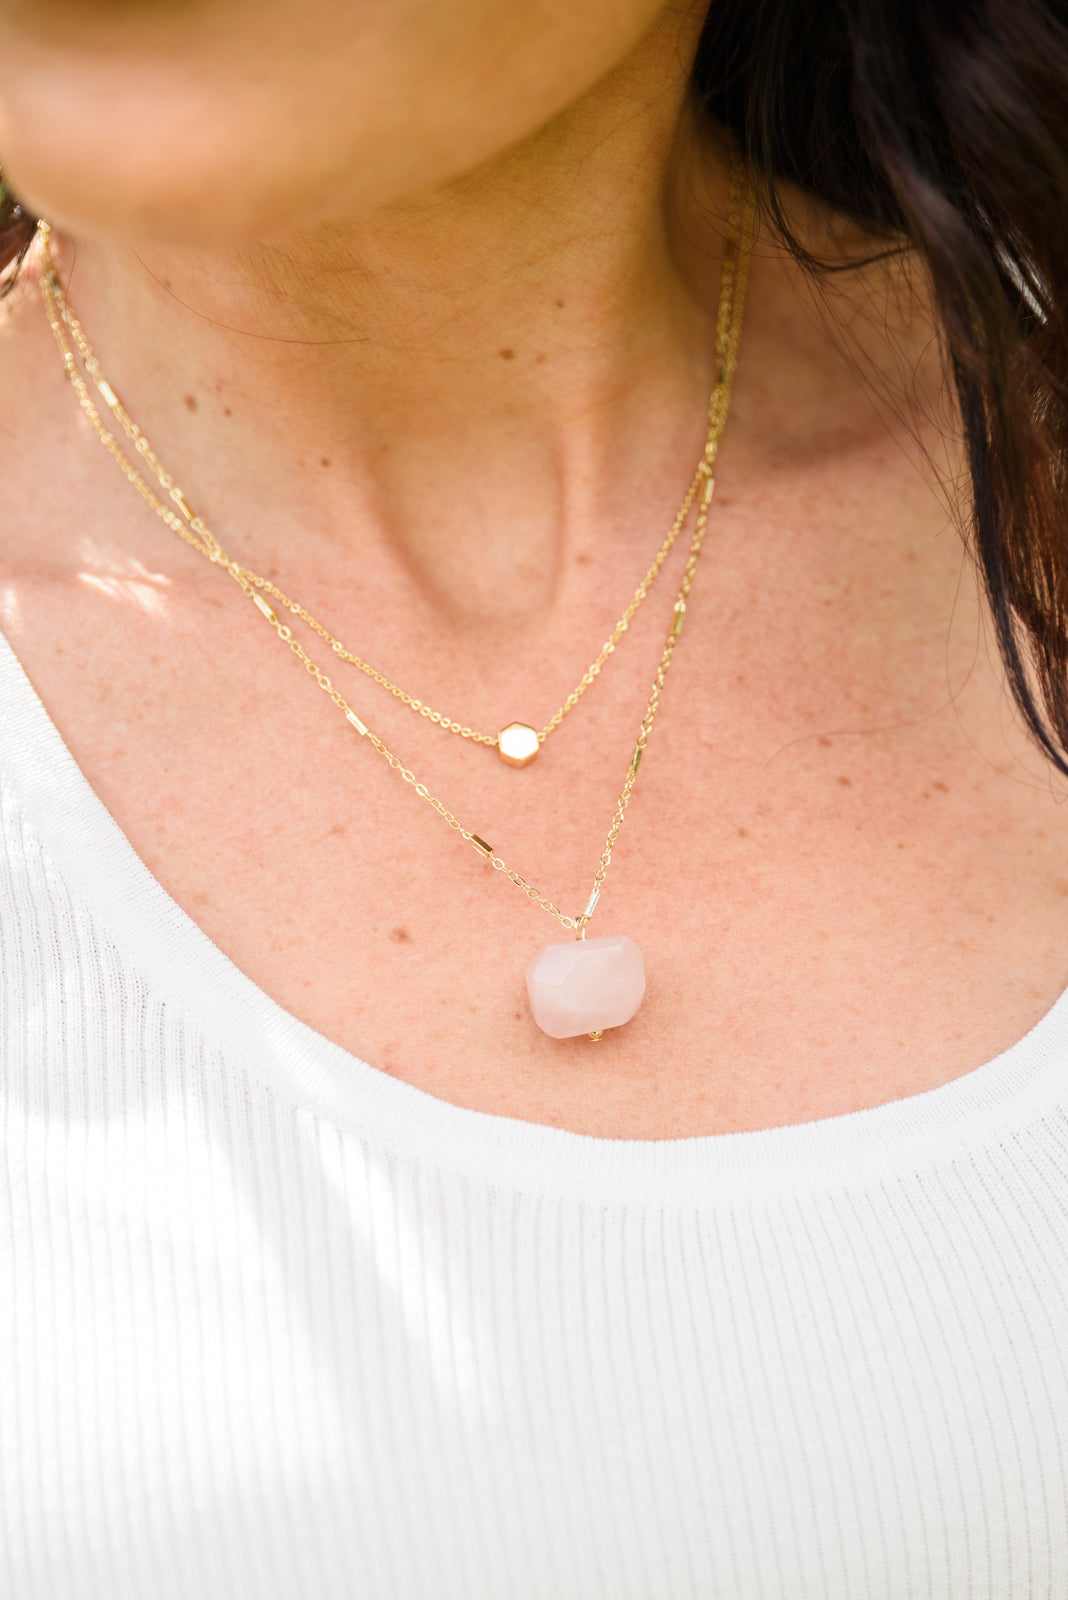 Meet Me There Stone Layered Necklace